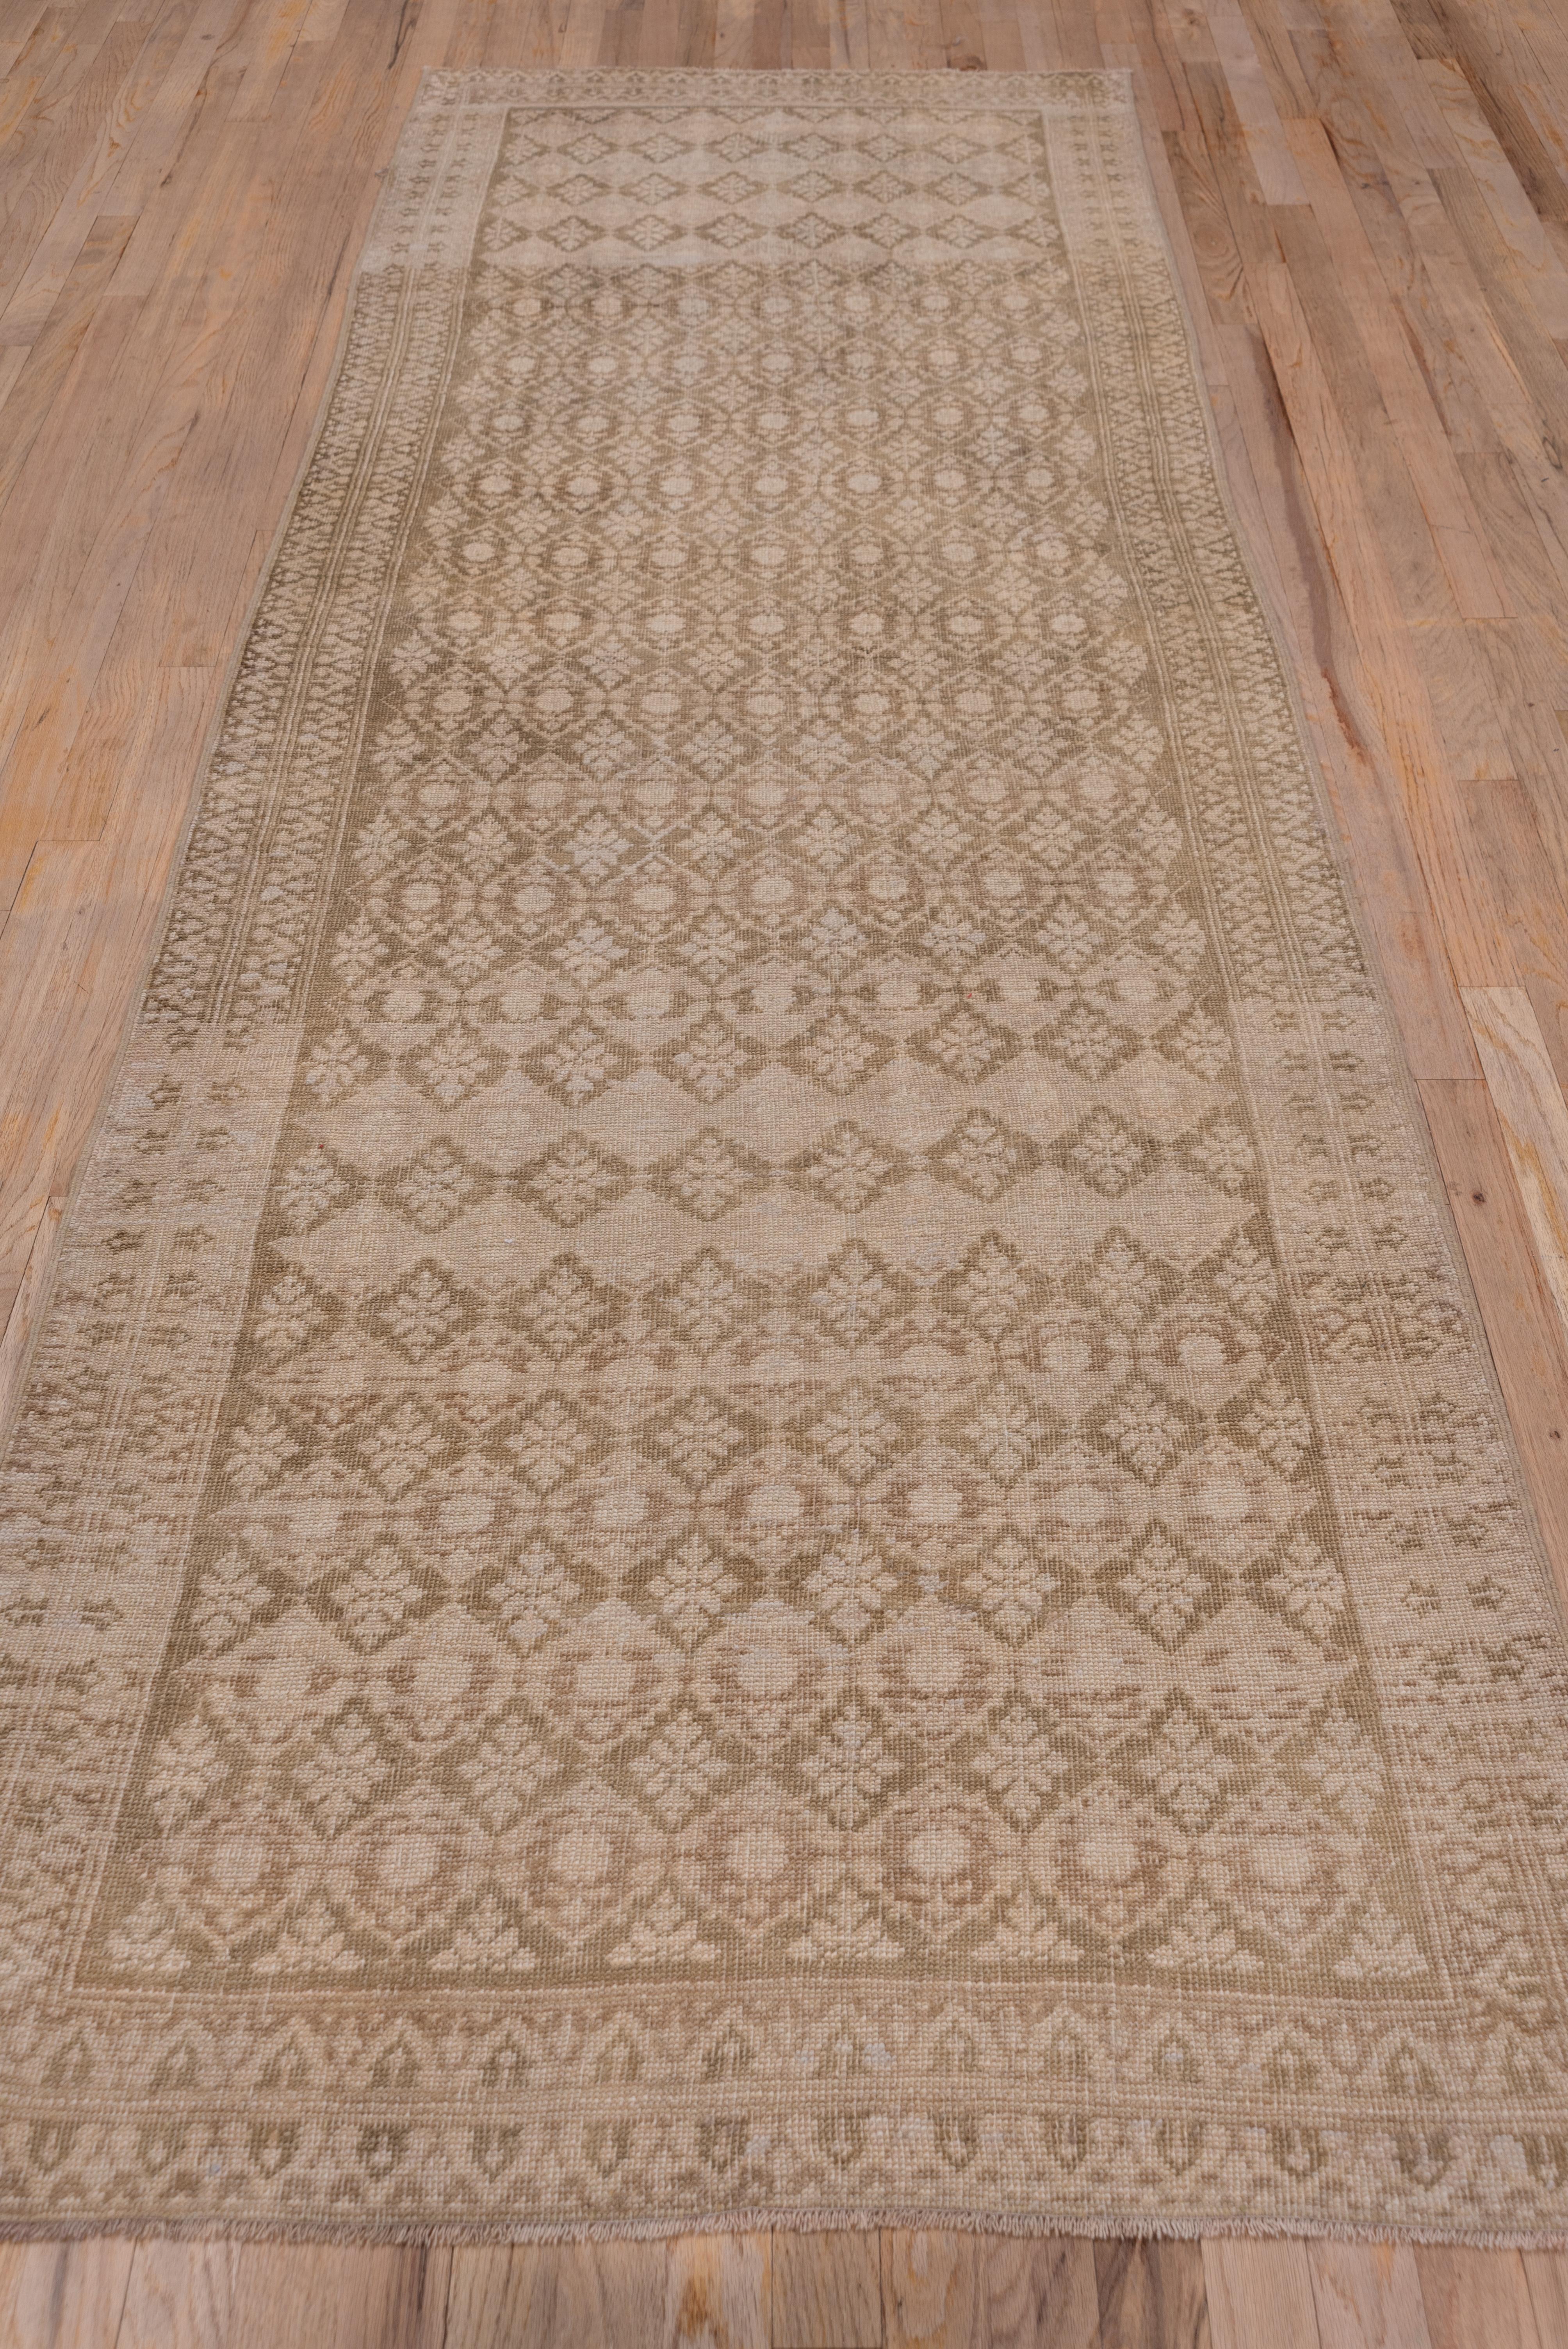 This Anatolian village runner presents a bi tonal pattern in beige and light brown of a rough lozenge lattice enclosing small leafy elements, within a double heart border. This runner has a very distinct abrash.